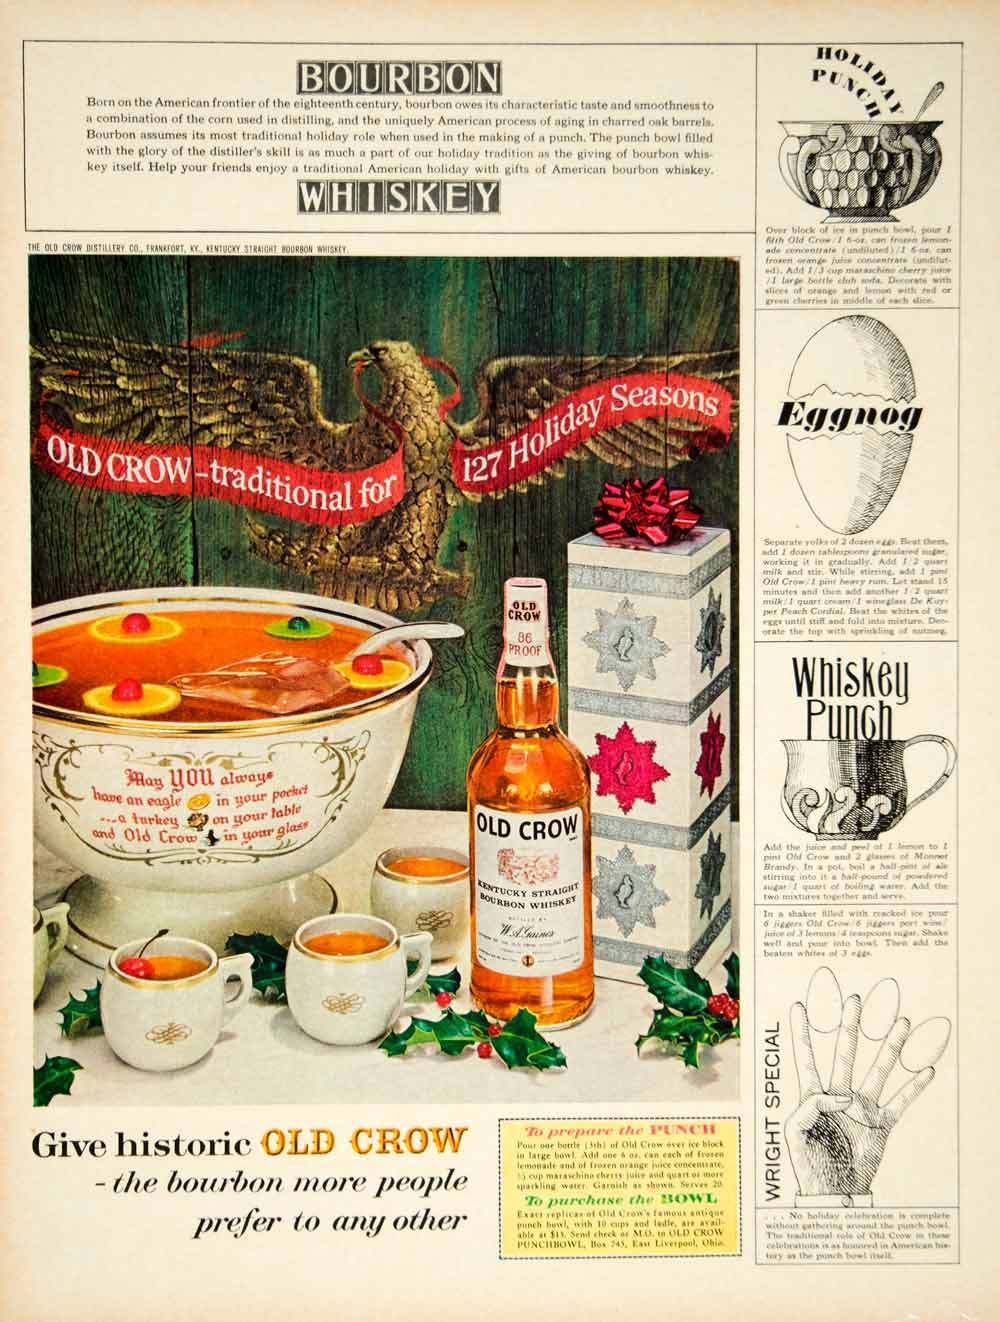 Vintage Ad Archive: Lifting Holiday Spirits!